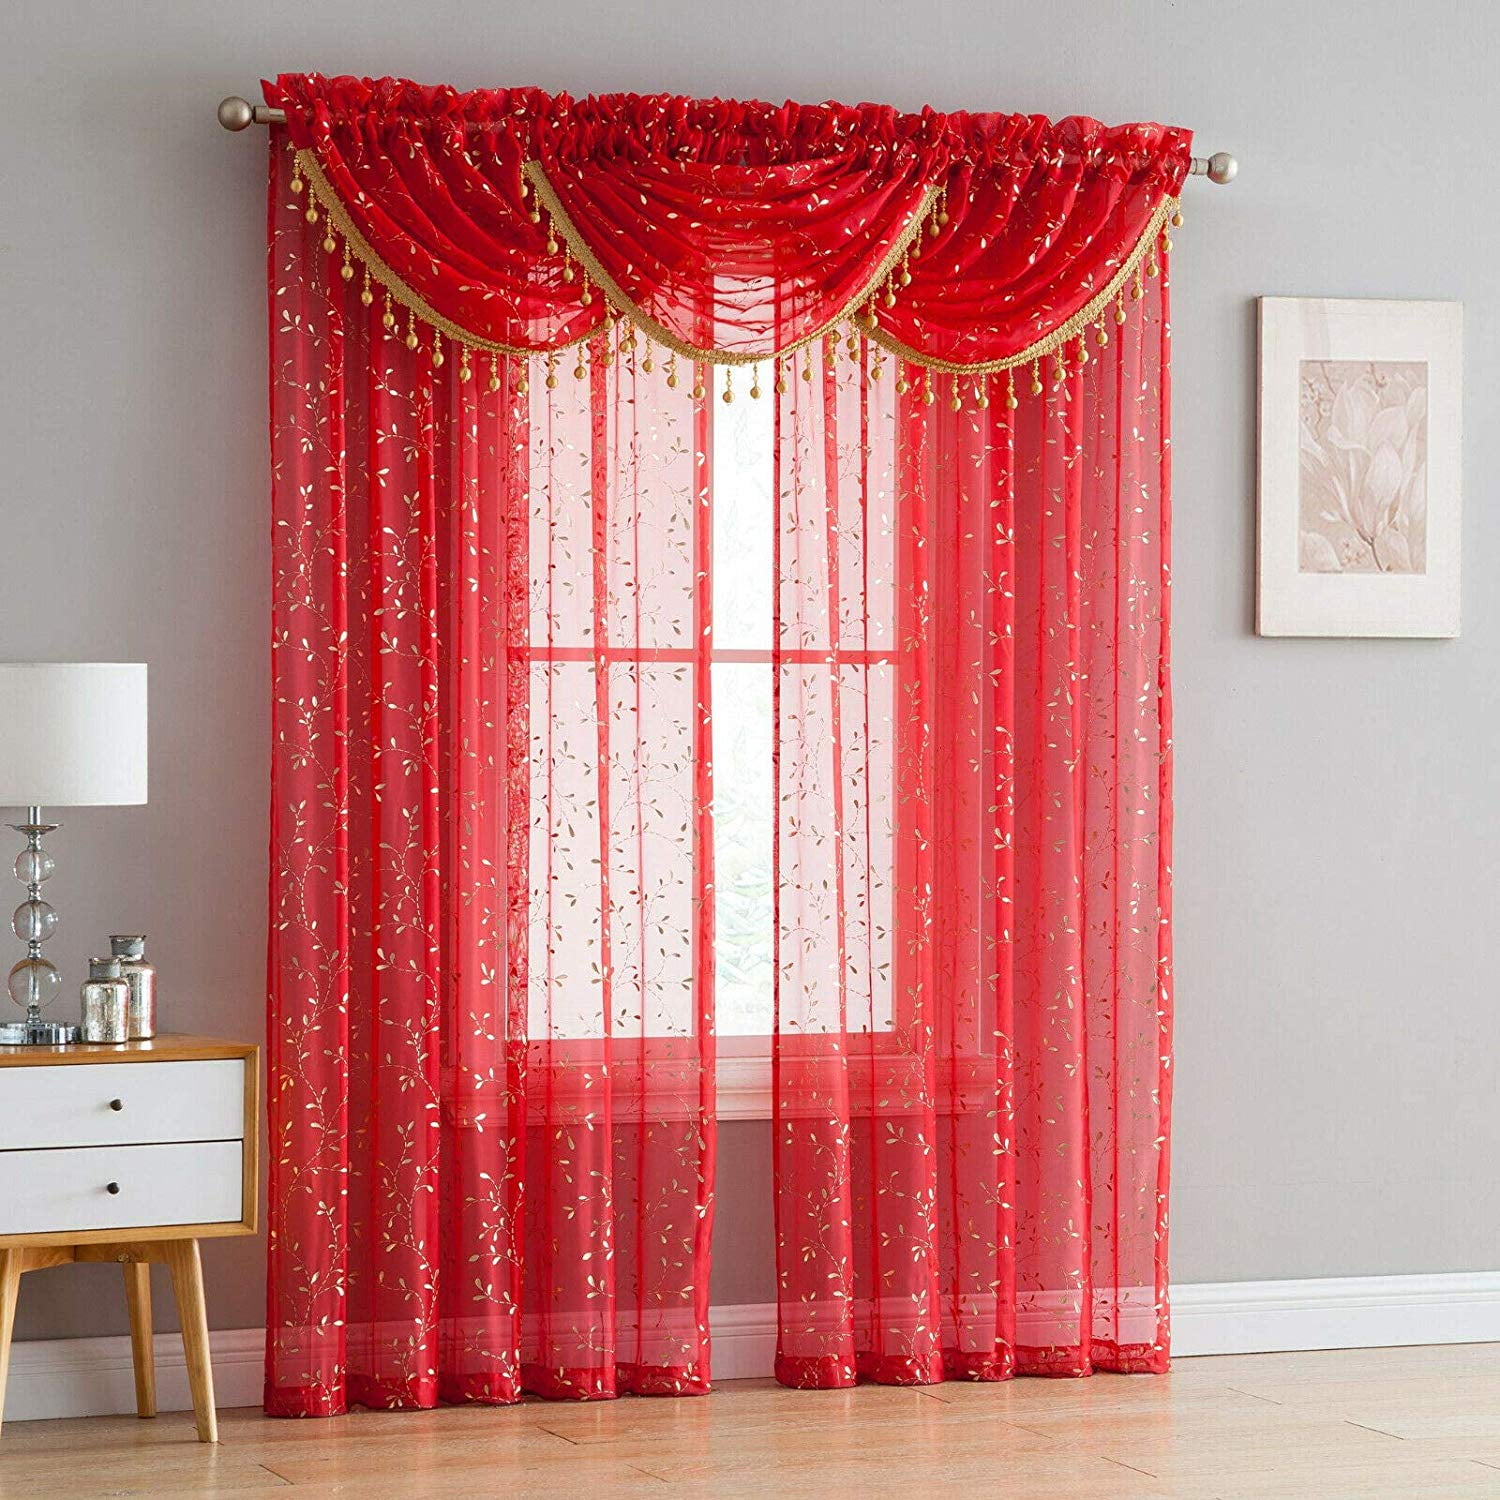 Latest Pictures Of Curtains With Sheers Ideas in 2022